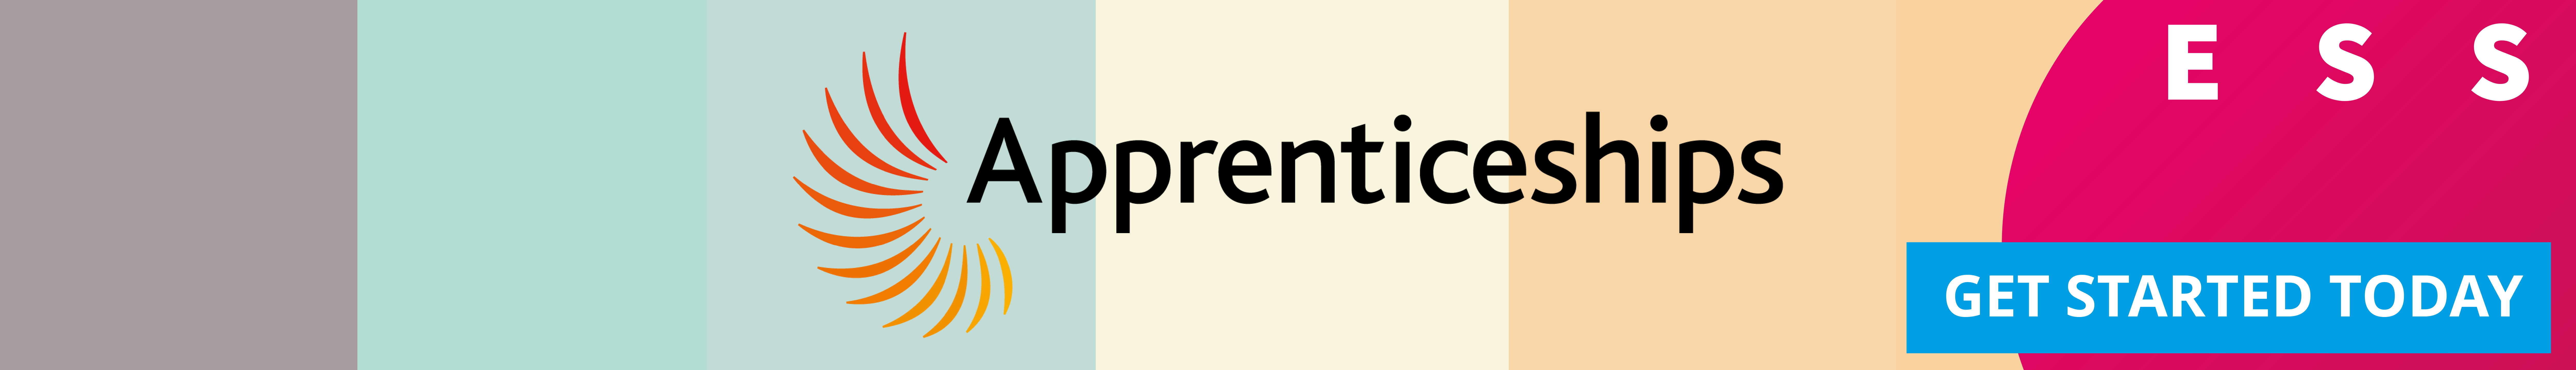 employer-s-guide-to-apprenticeships-essential-site-skills